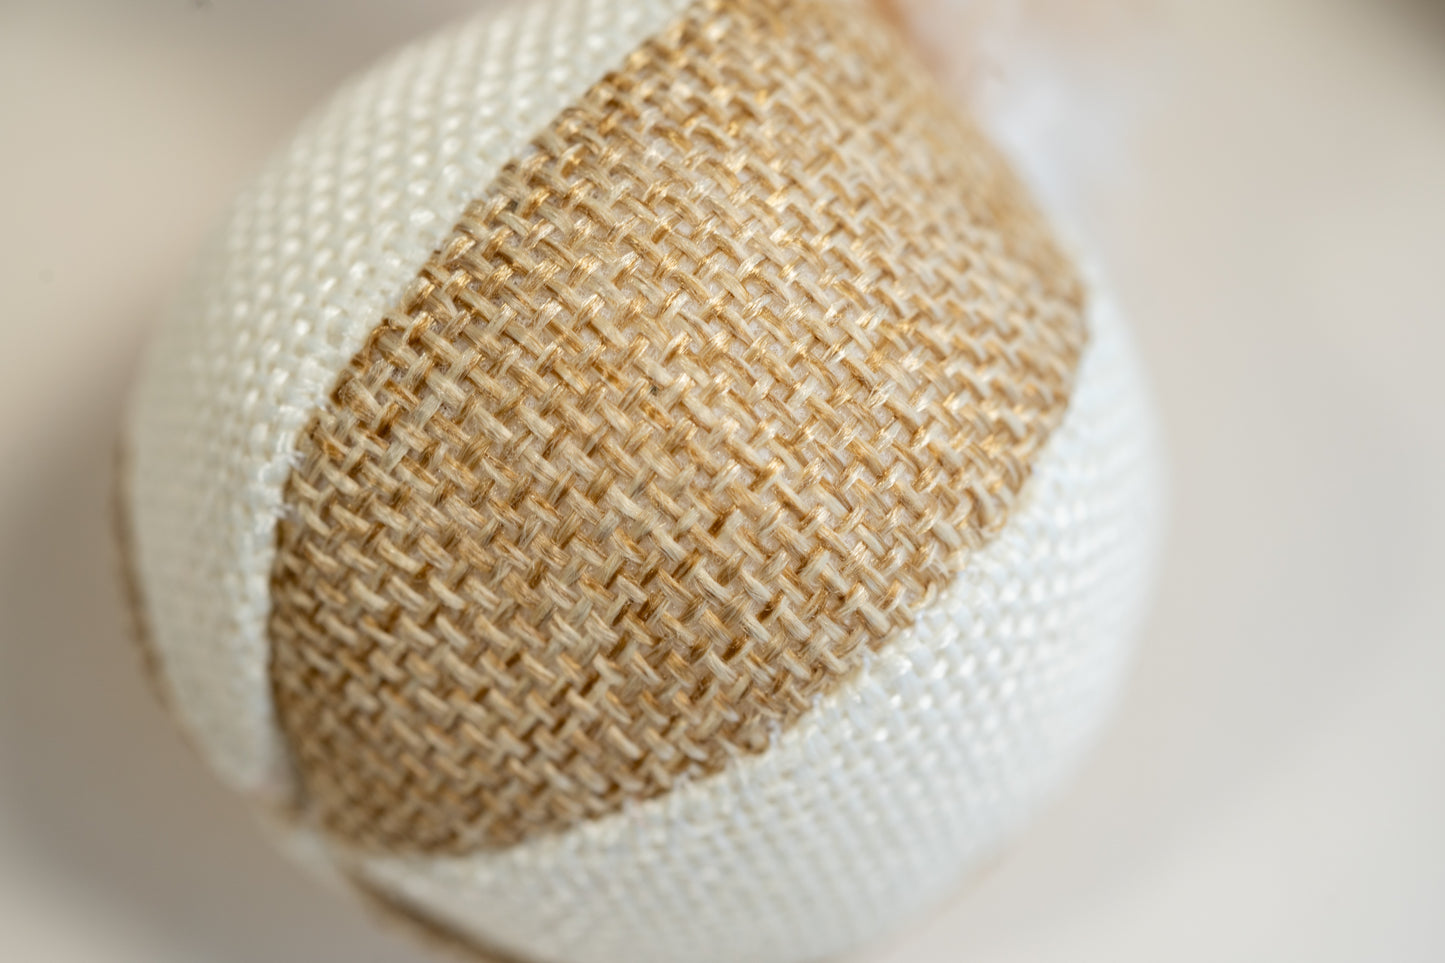 Small beach ball style cat ball made from burlap.